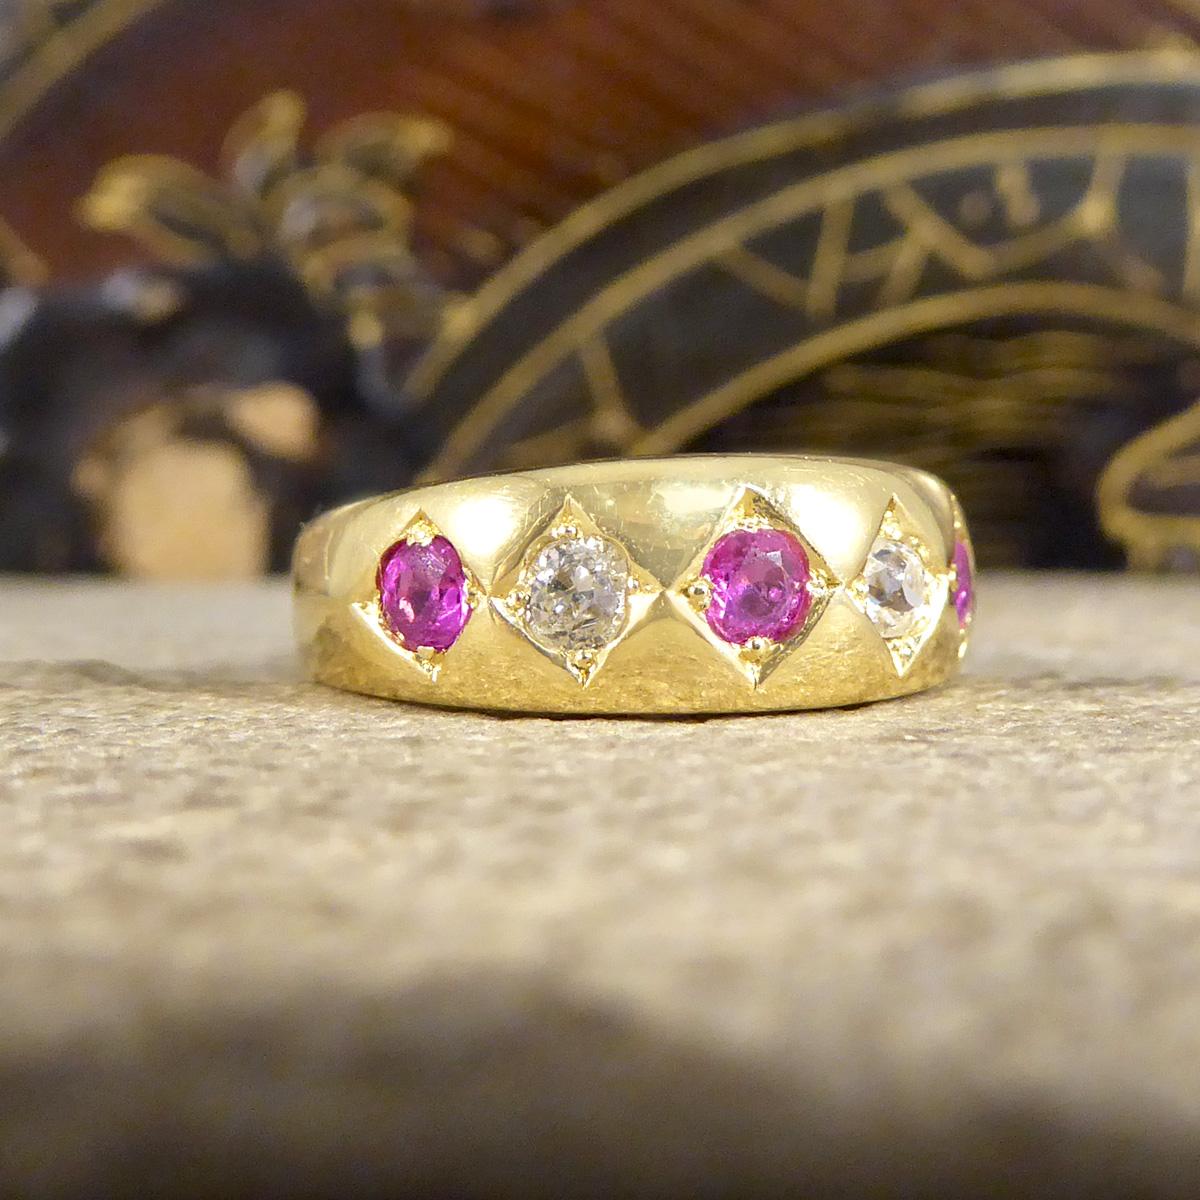 This antique ring was crafted in the Edwardian era. It features clear hallmarks on the inner band showing it was crafted in 1909 in London England. The Rubies are bright and beautiful in colour with an even colour distribution, with Diamonds that